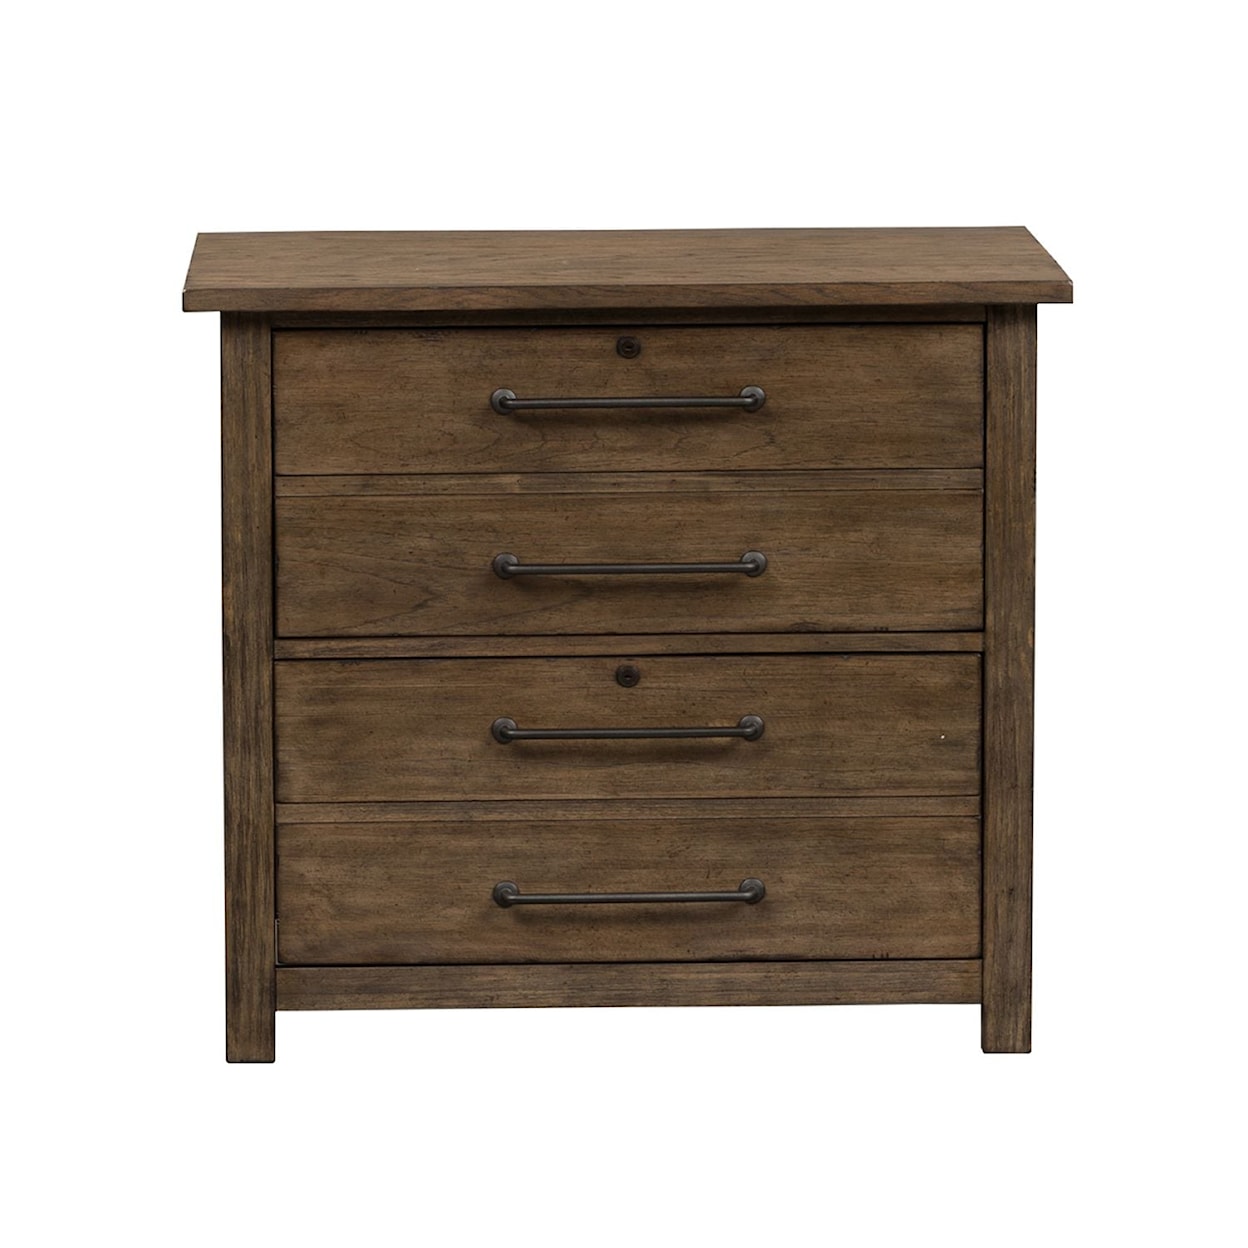 Libby Sonny Lateral 2-Drawer File Cabinet